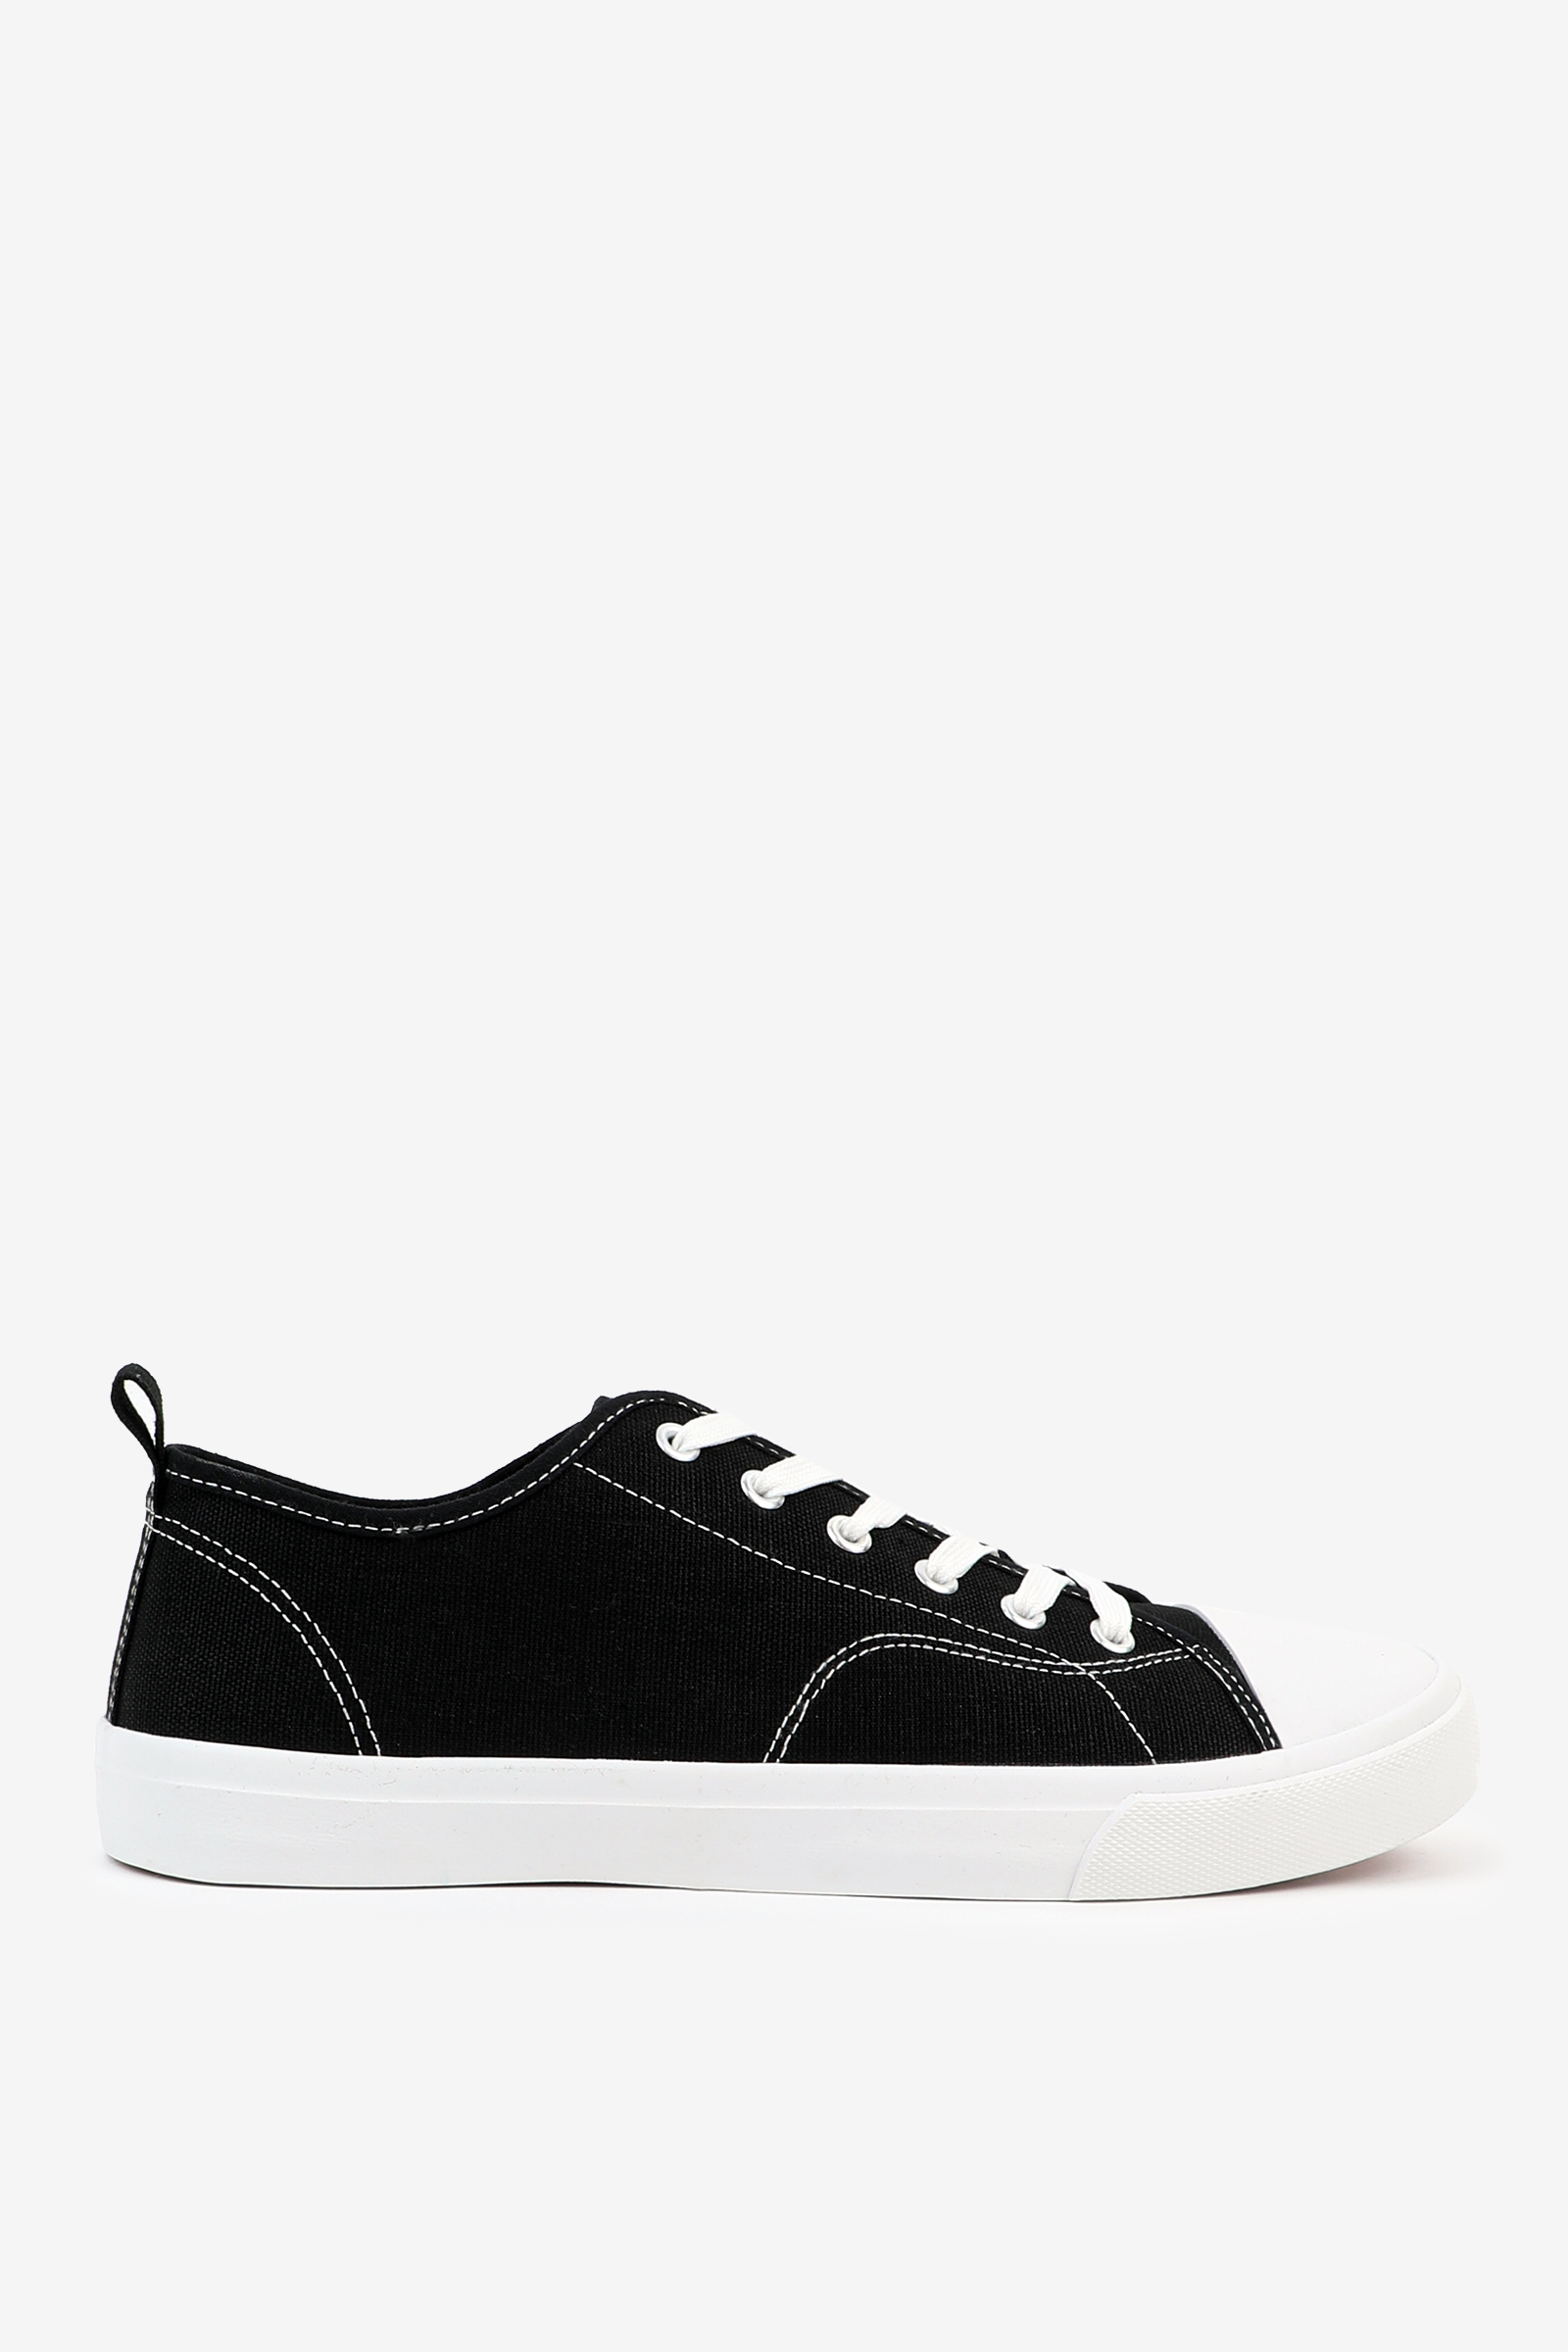 Ardene Man Low Top Sneakers with Toe Cap For Men in Black | Size 8 | Rubber